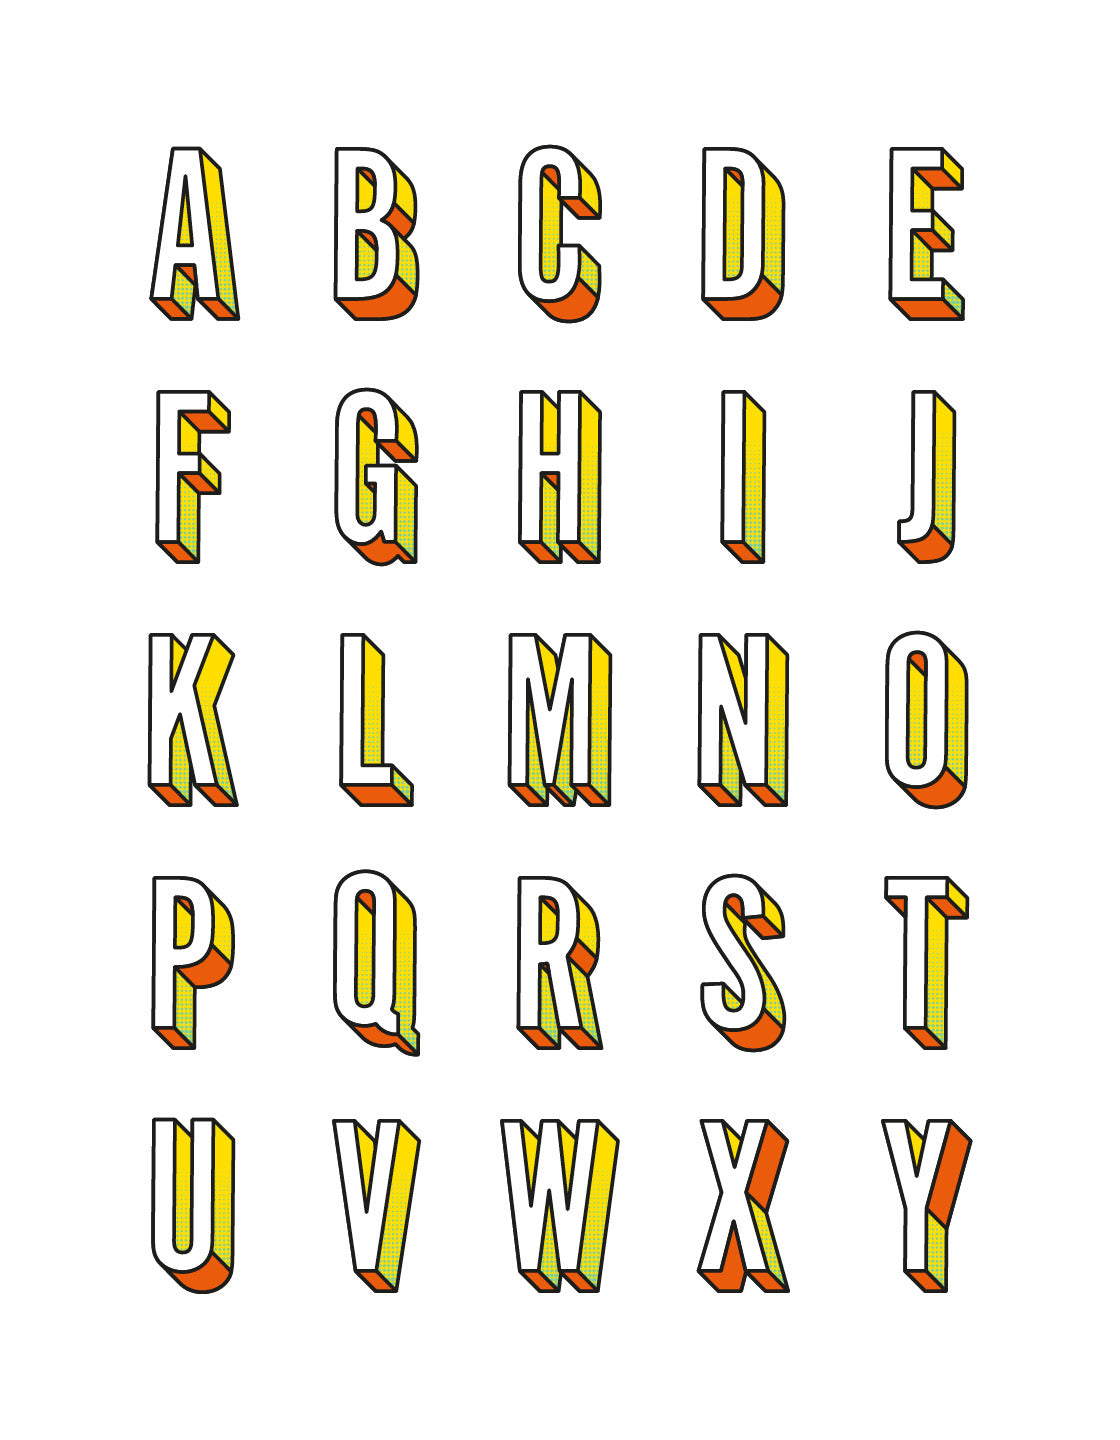 Image depicting all the letters of the alphabet in a 3D block font against a white background